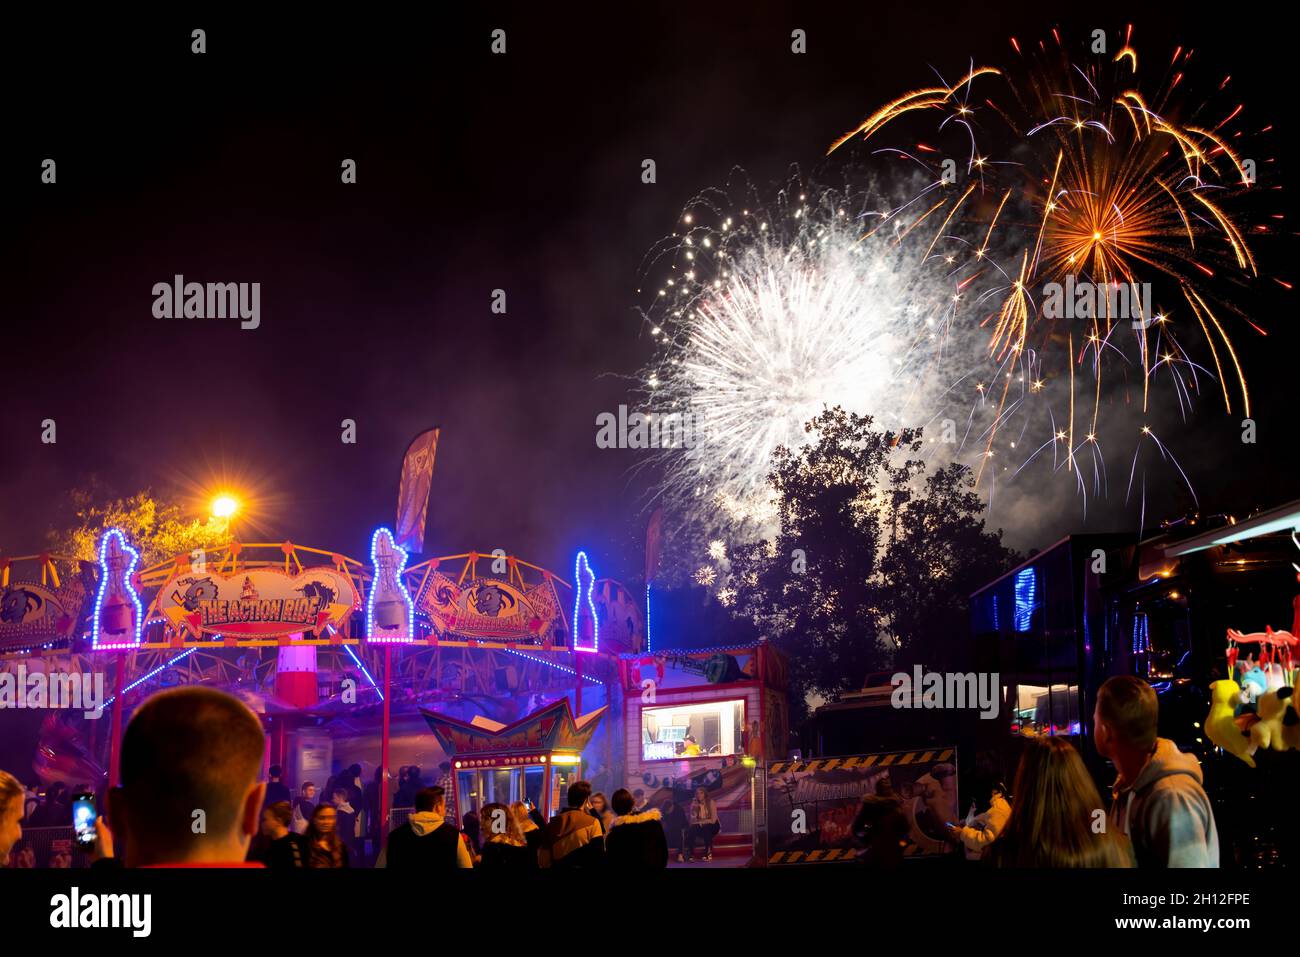 Germany, 10-16-2021: Funfair at night with fireworks in background Stock Photo